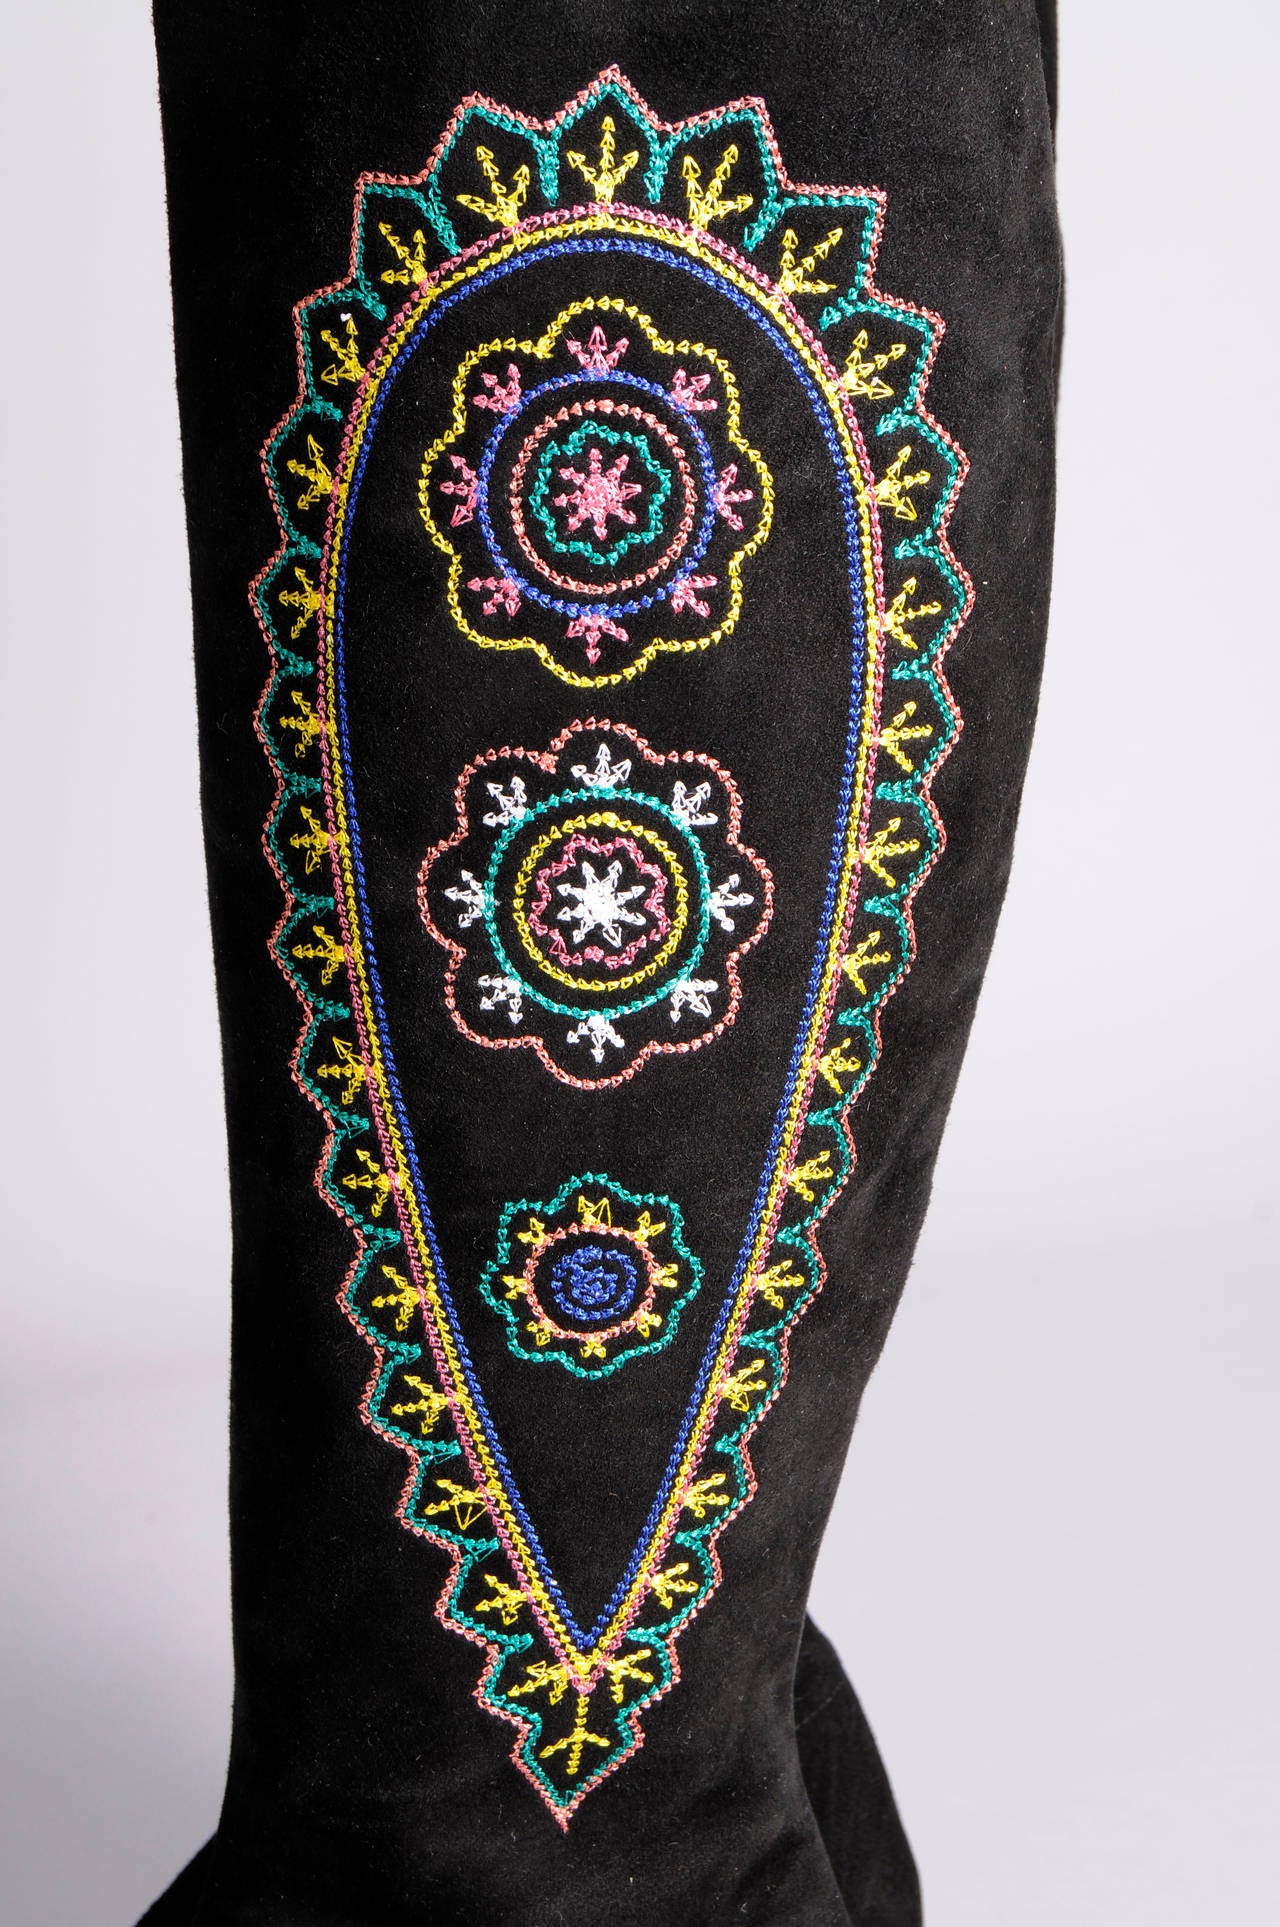 Tall black suede boots are embellished with colorful embroidered botehs. The boots have a side zipper, they are lined in black leather and they have leather soles. They have never been worn and they are marked a size 41. Please email if you need any